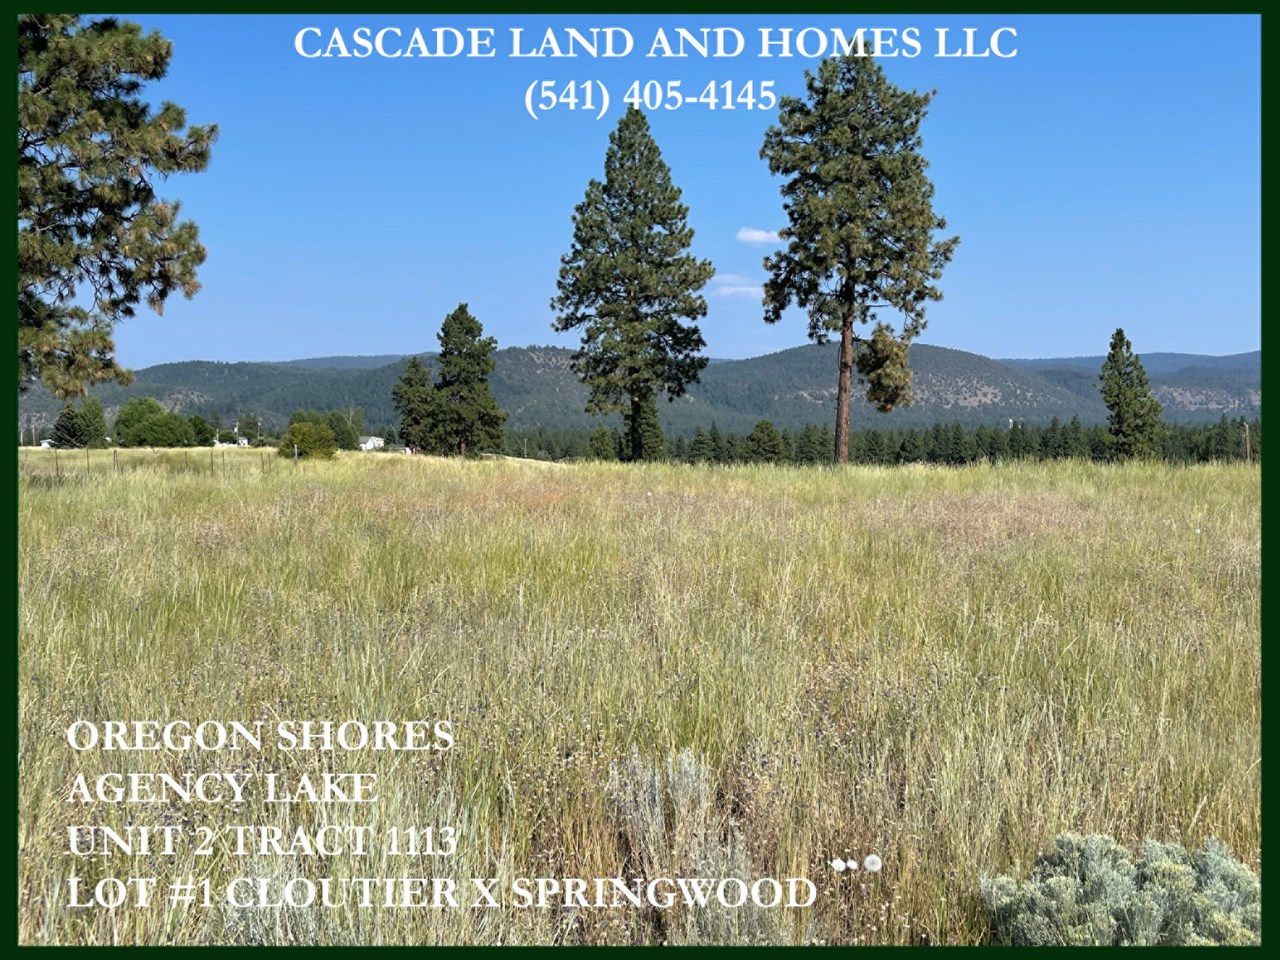 the desirable oregon shores subdivision is popular in the area for it's proximity to agency lake and the amenities it offers. water is even included in your low hoa fees!